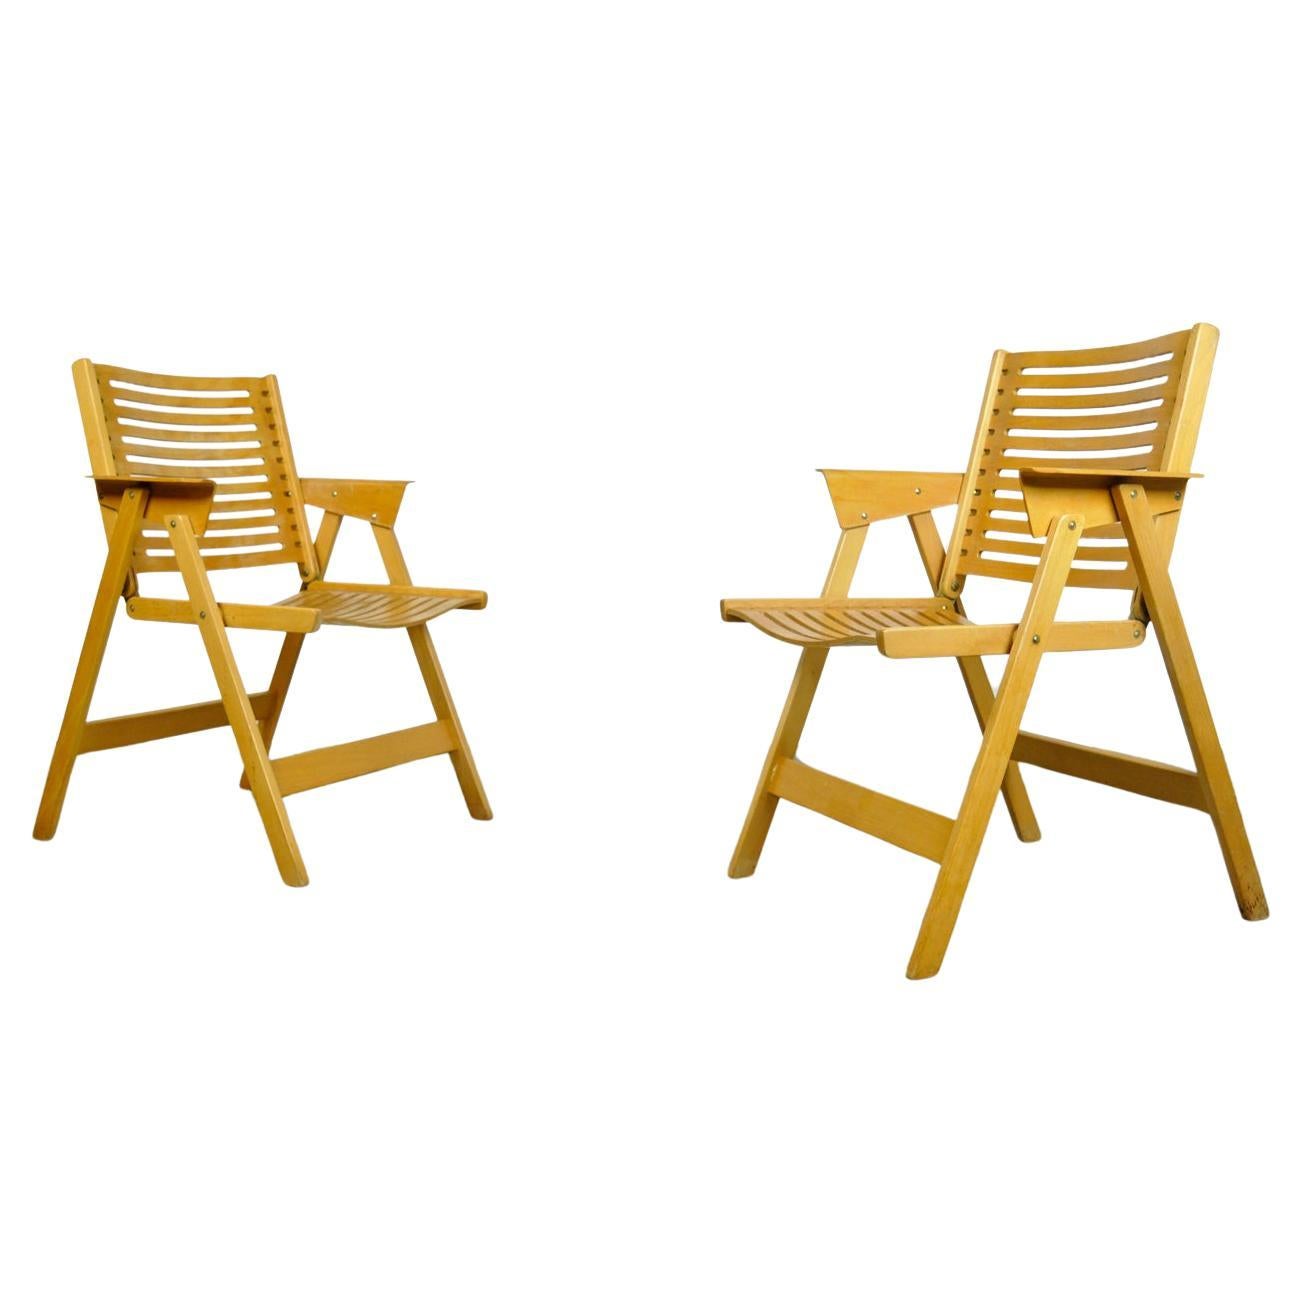 Original vintage foldable dining chairs by Niko Kralj (1920-2013) for Stol, 1950